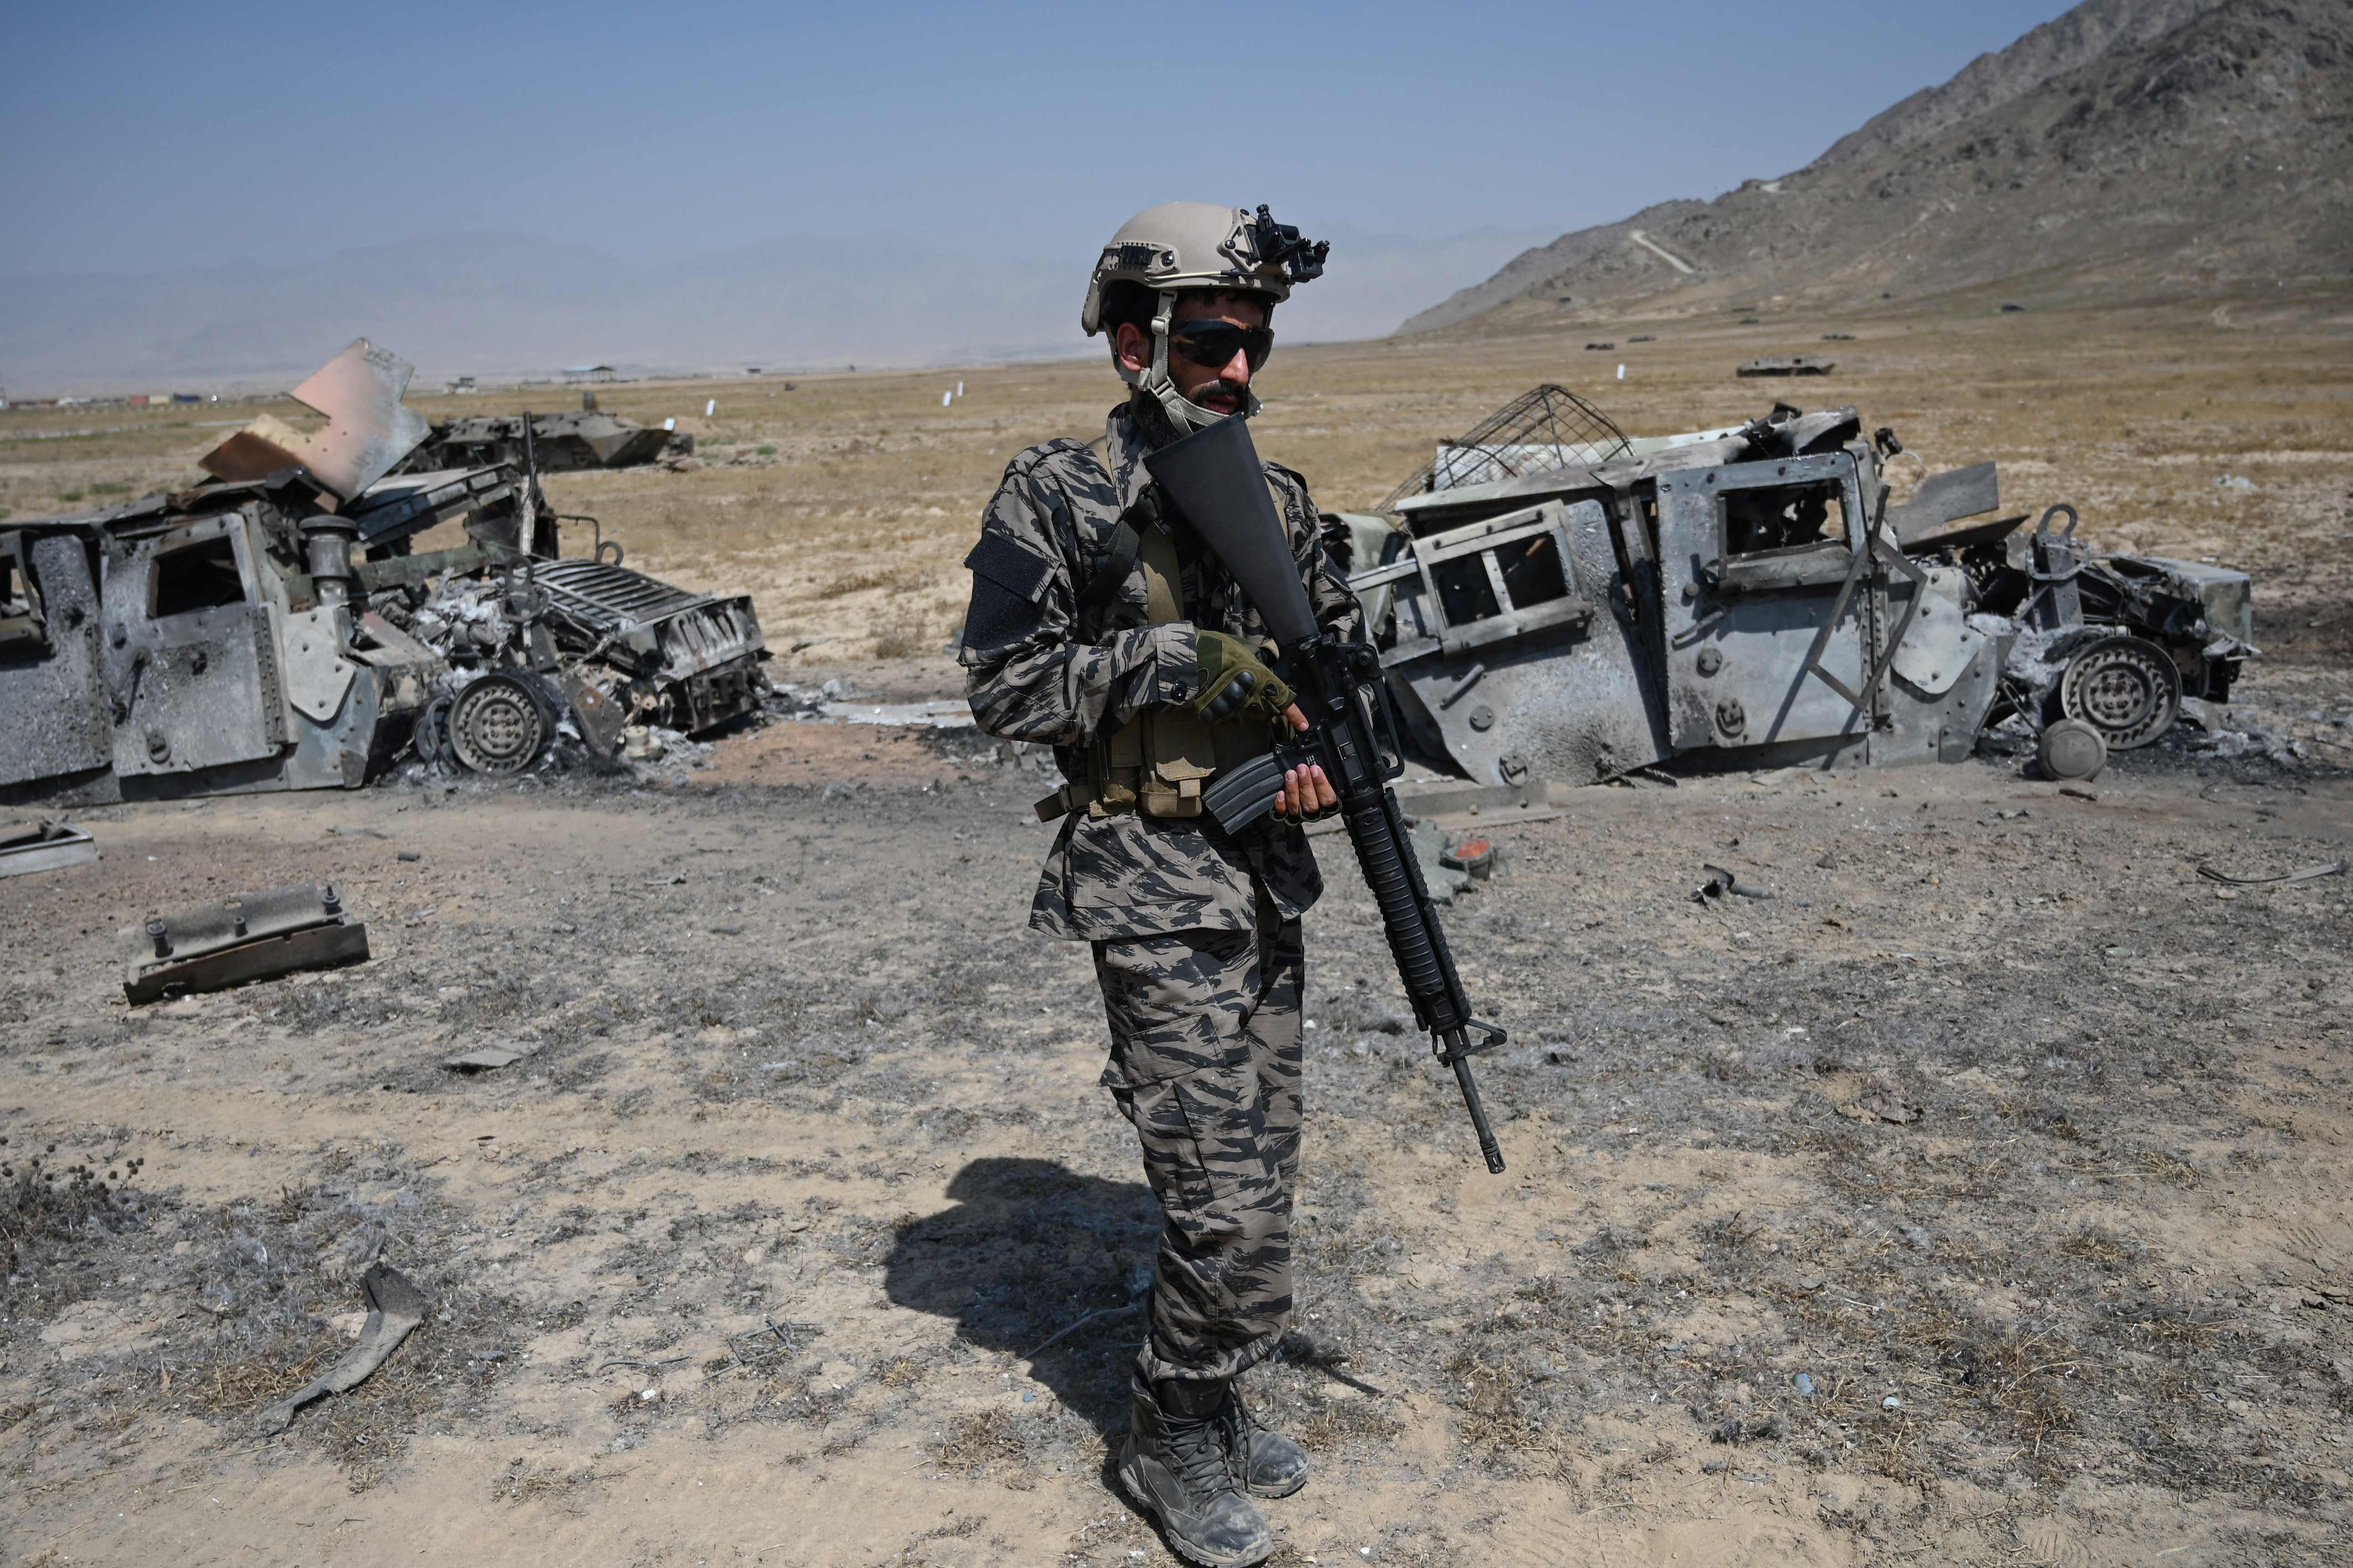 A member of the Taliban Badri 313 military unit stands besides damaged vehicles near Kabul